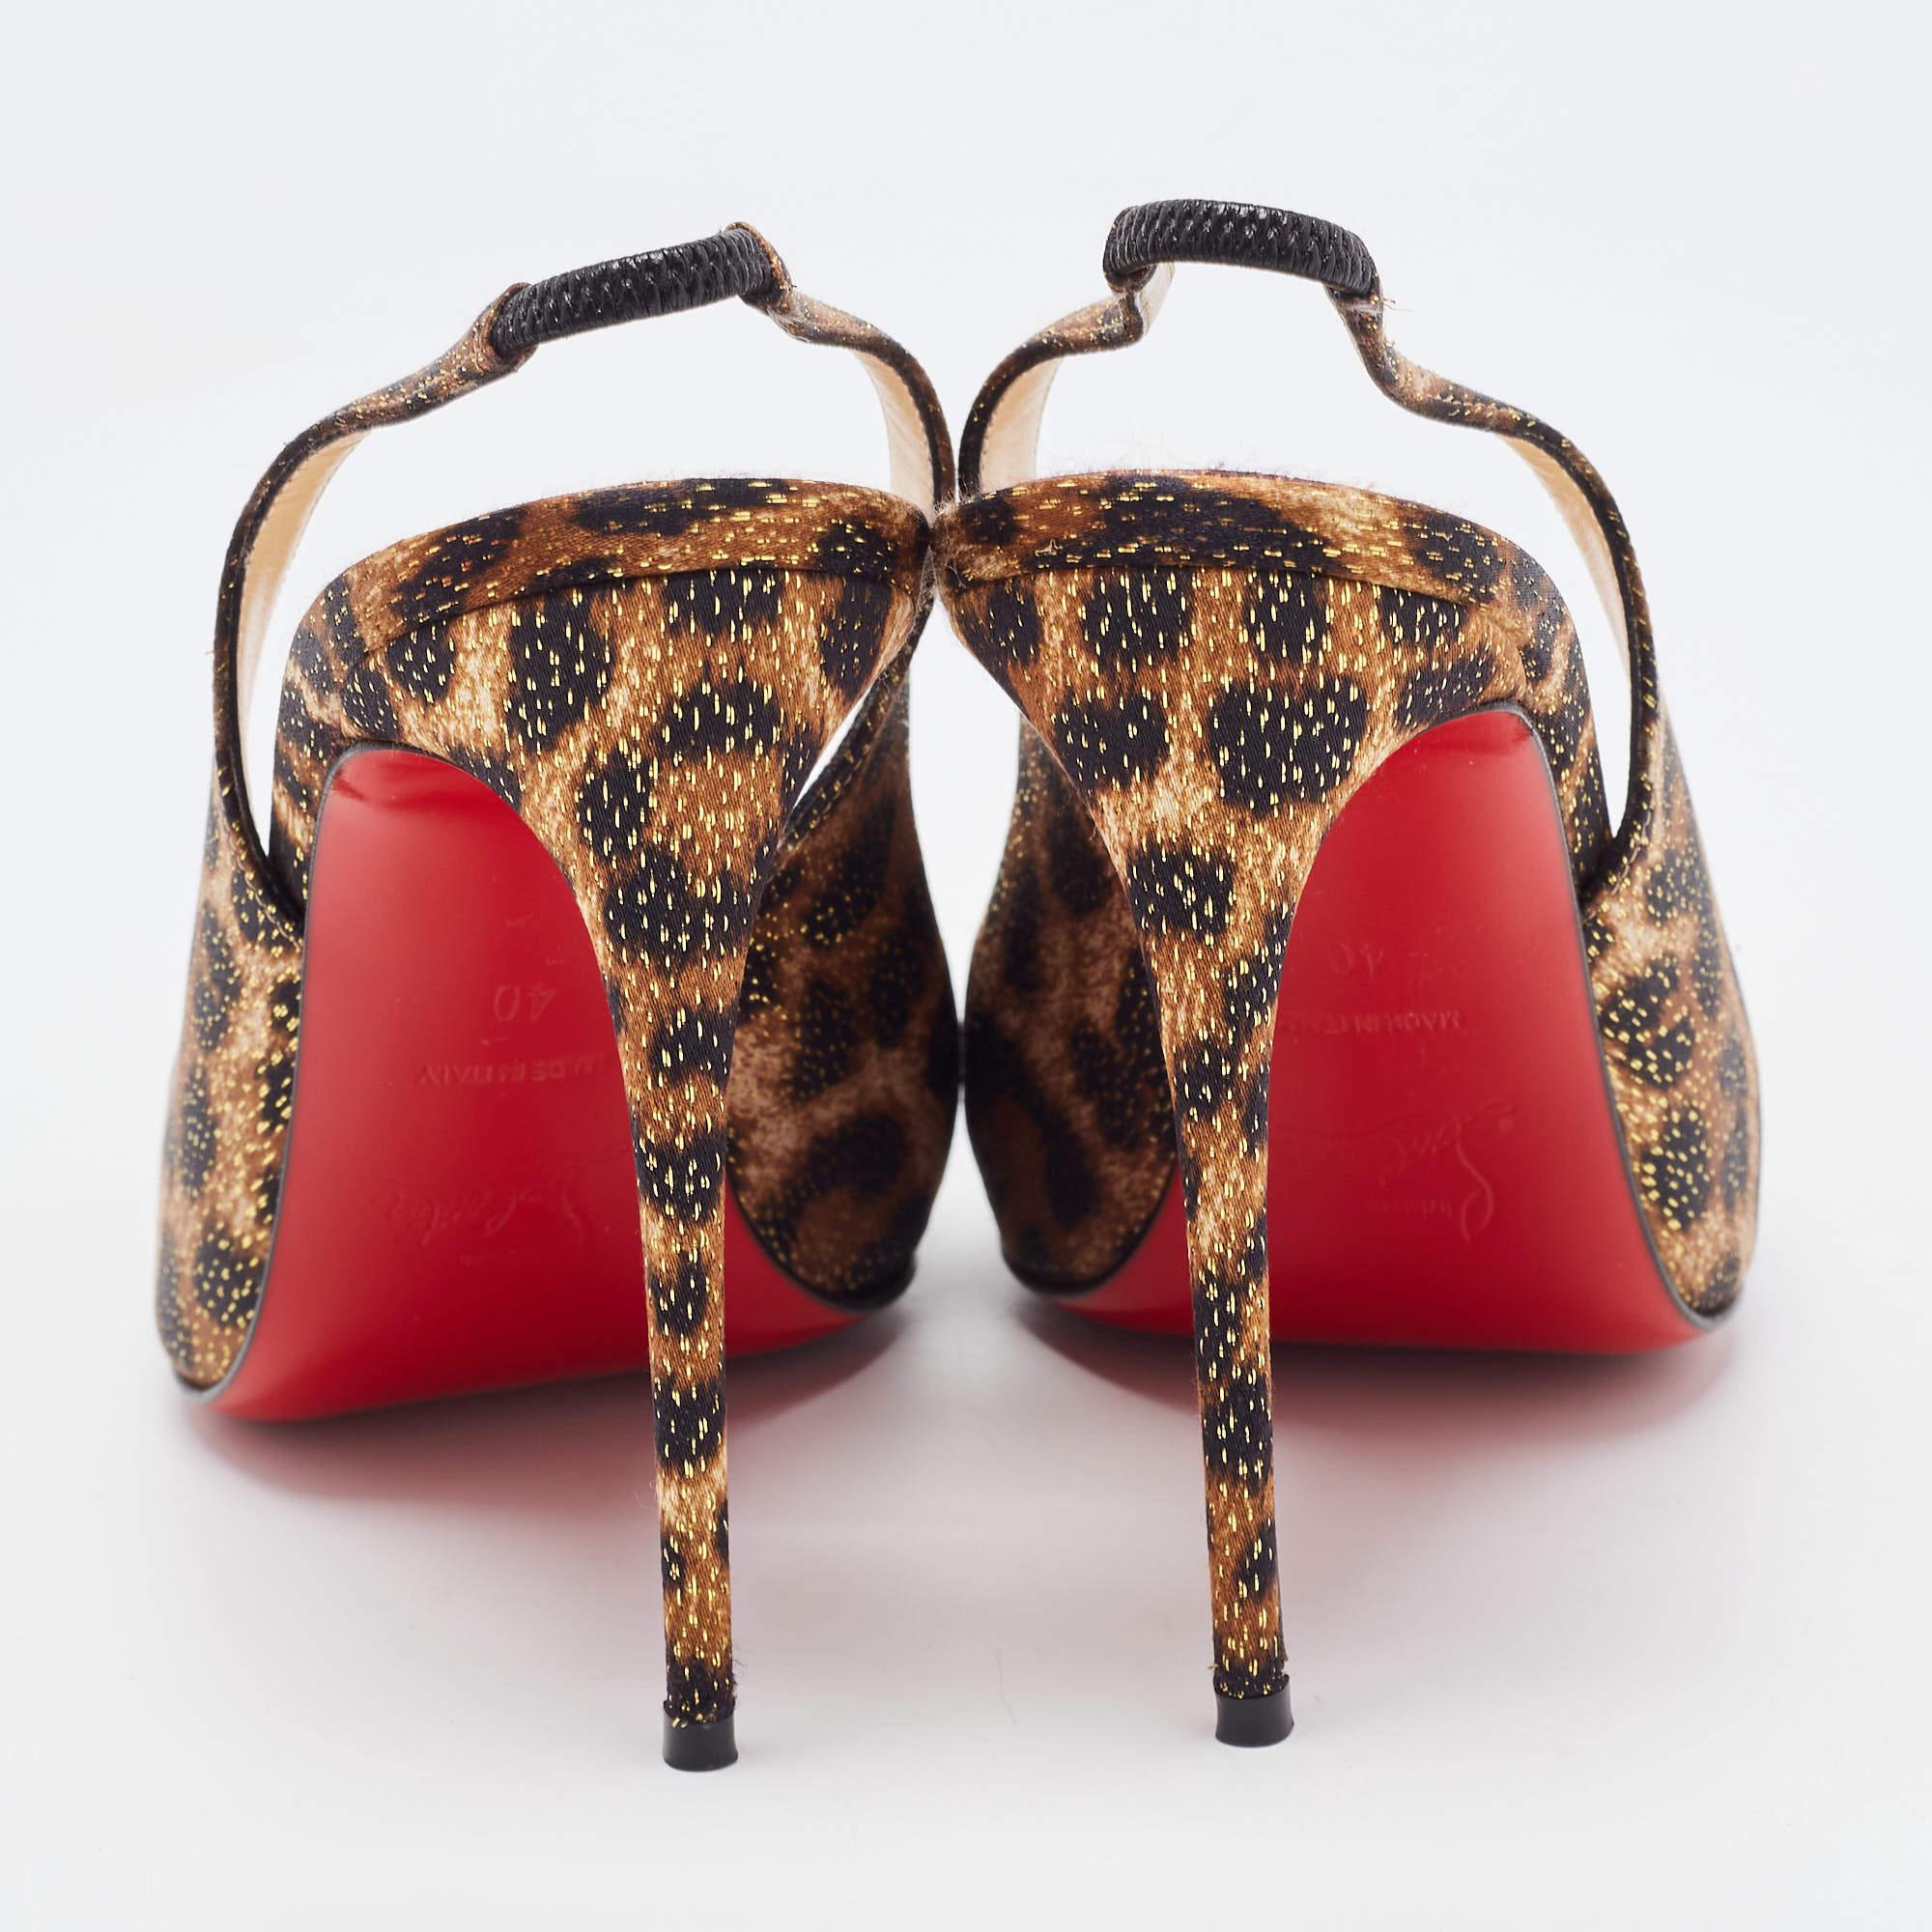 Christian Louboutin Tricolor Leopard Print Satin Spiked Drama Slingback Pumps Si For Sale 2